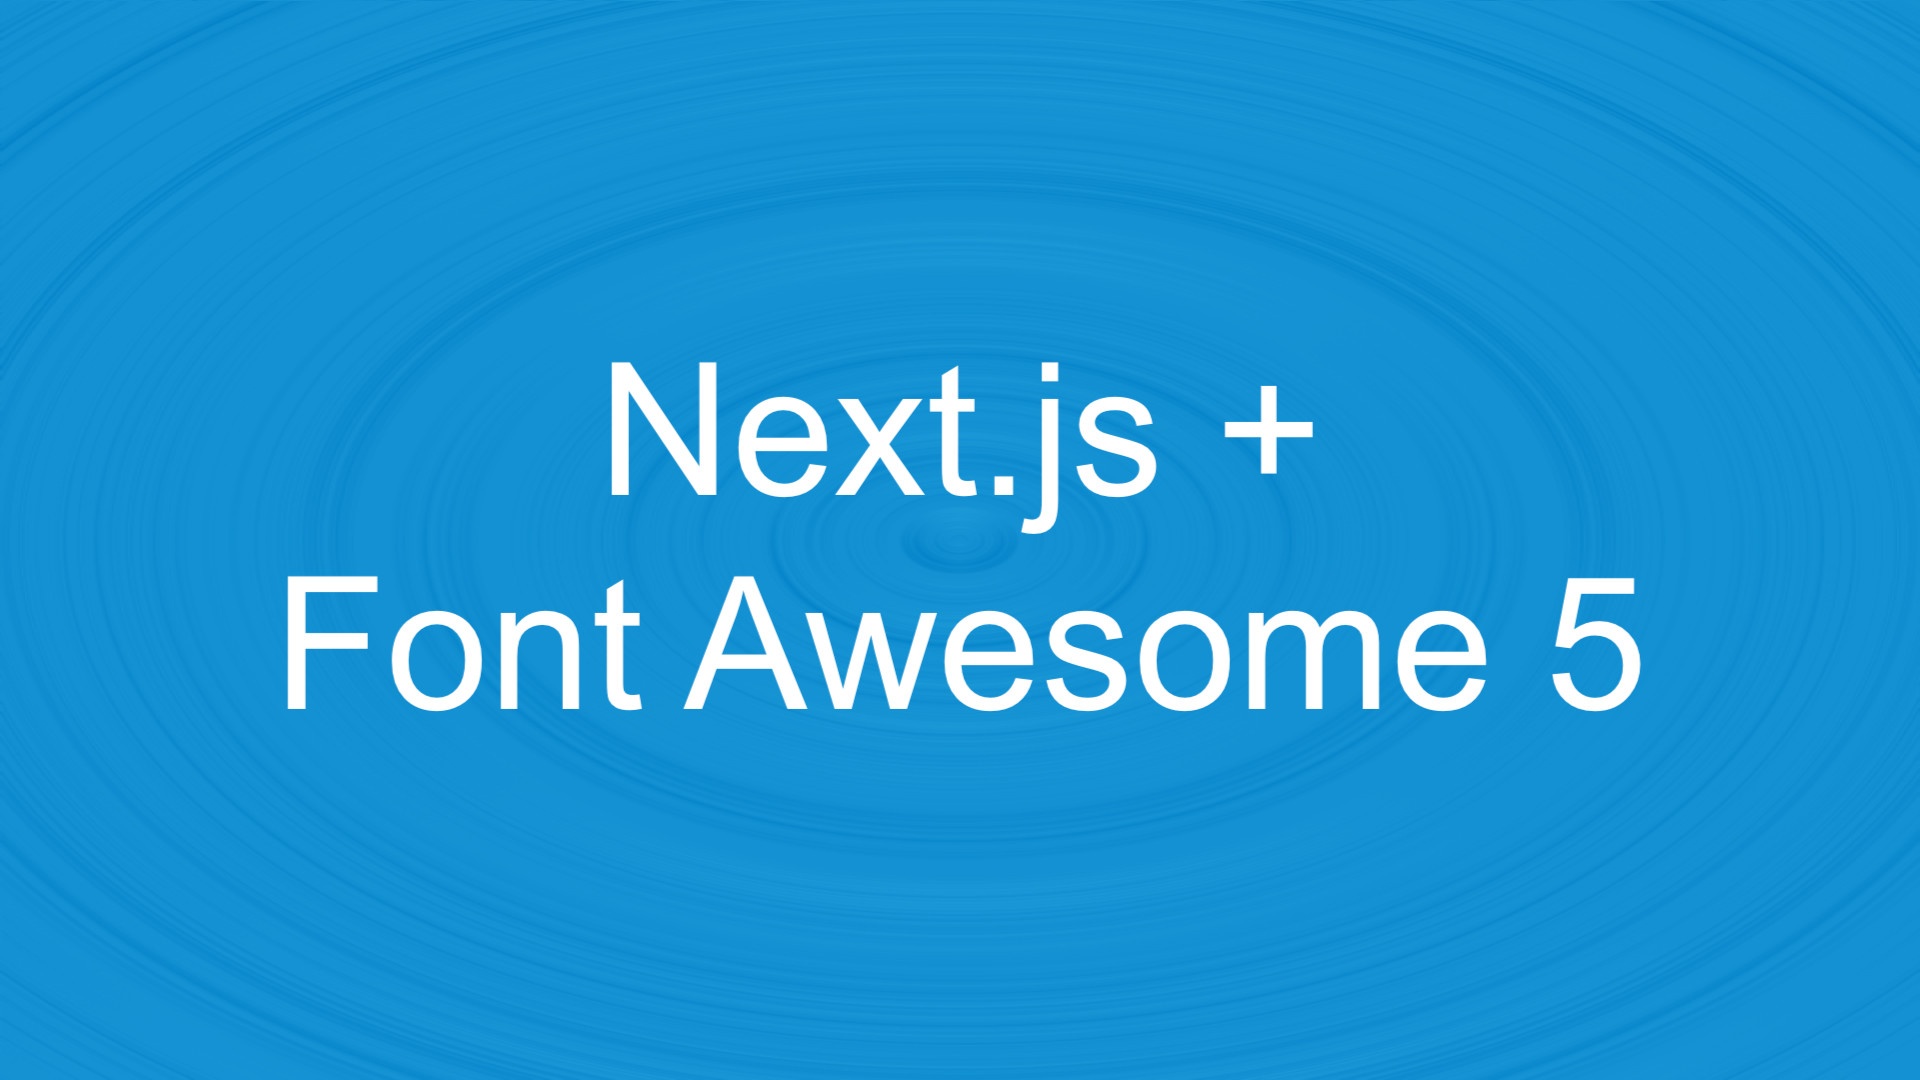 Download How to use Font Awesome 5 with Next.js - Kindacode